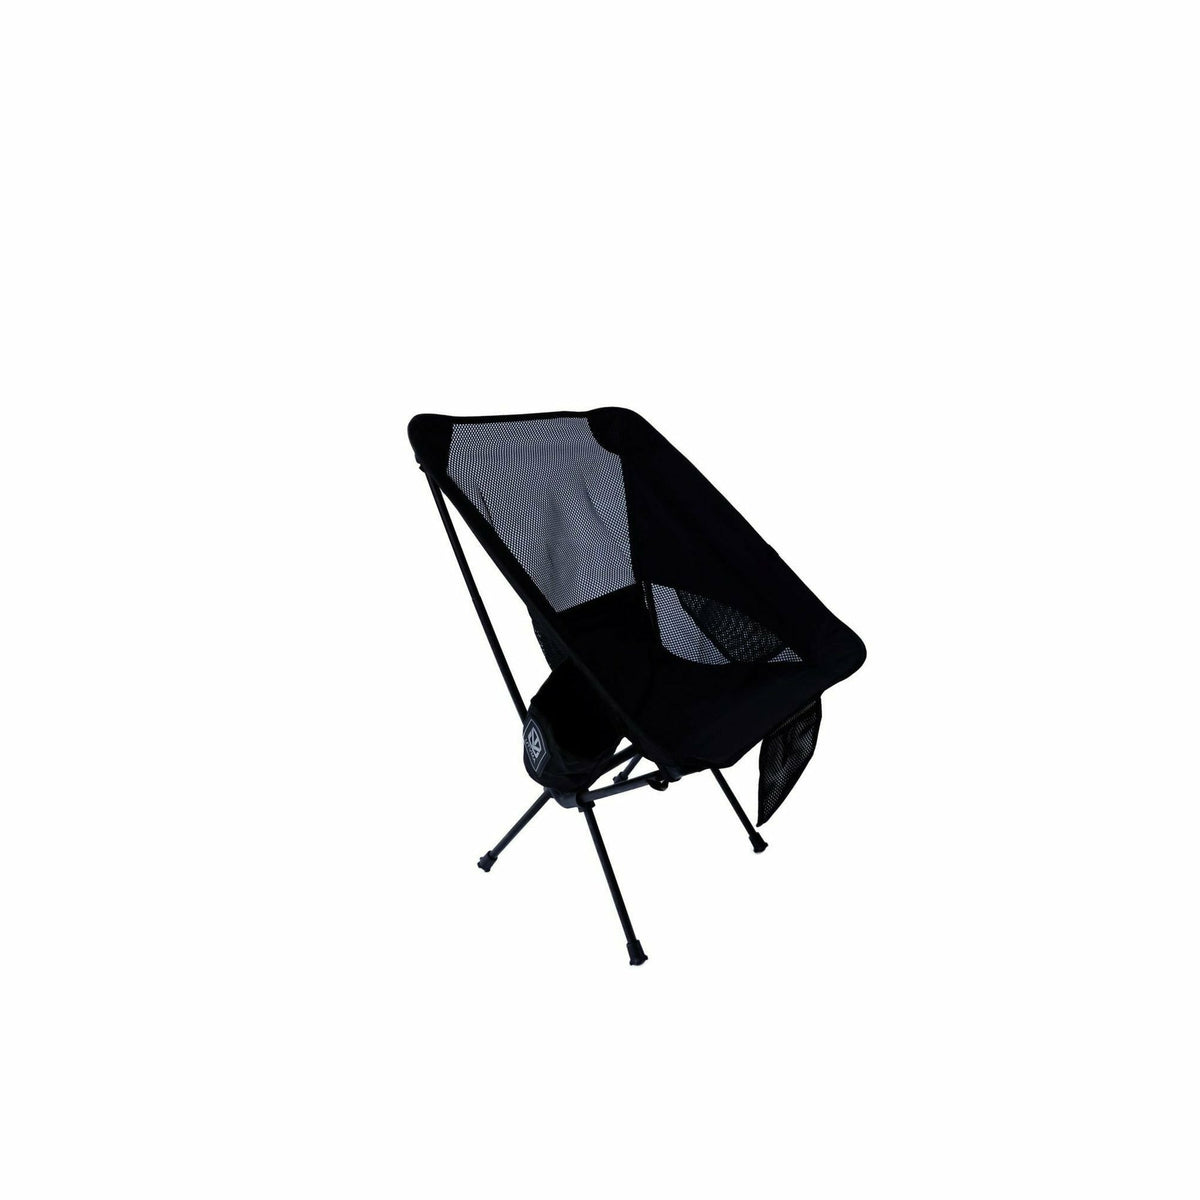 UTV Mountain Accessories Camp Chair with Roll Cage Bag